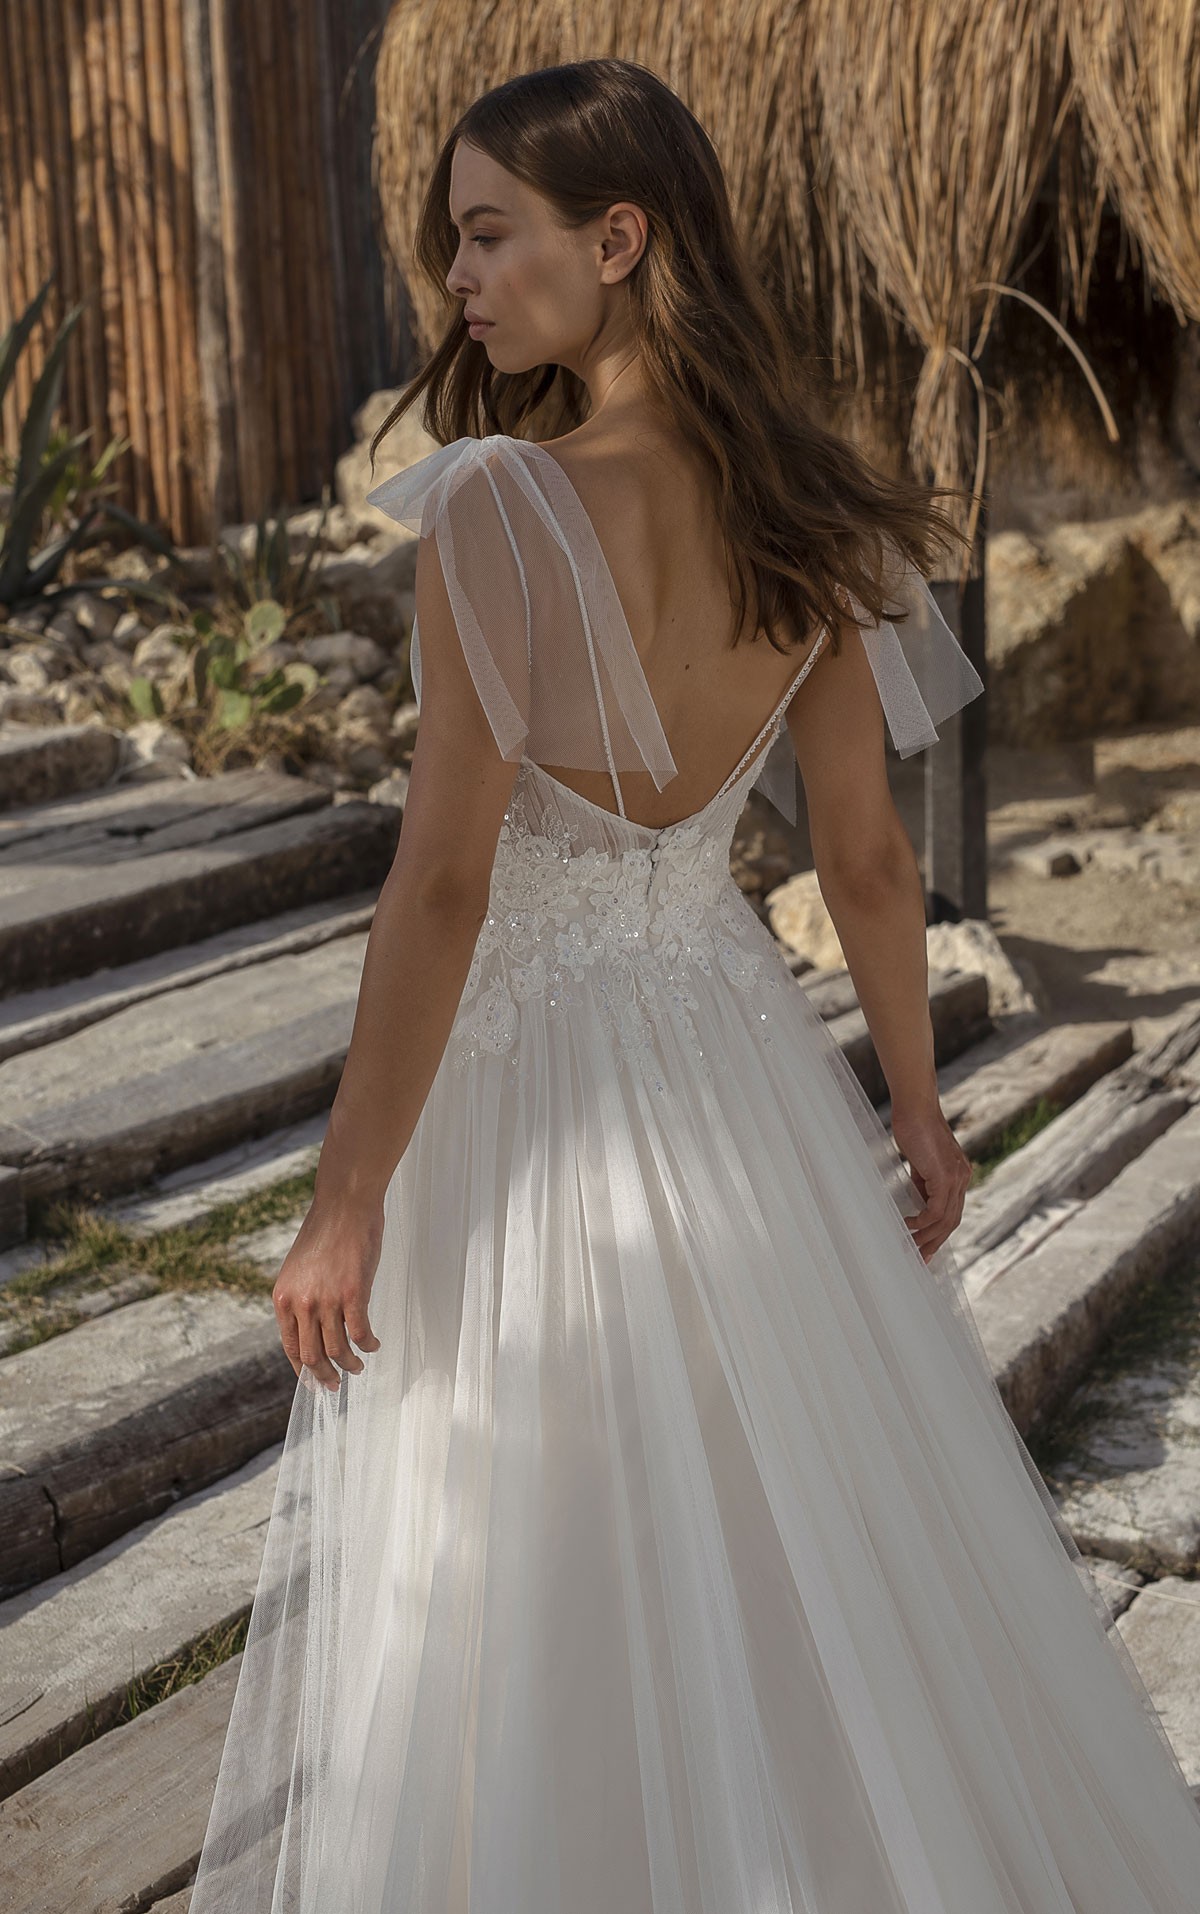 Ohanna - Size 16 - Le Papillon by Modeca - Dutch Bridal Design #Ohanna - Tulle & Lace Romantic lightweight wedding dress - Blessings Bridal Boutique, Westdene, Brighton. East Sussex. BN1 5GG T: 01273 505766 E: info@blessingsbridal.co.uk